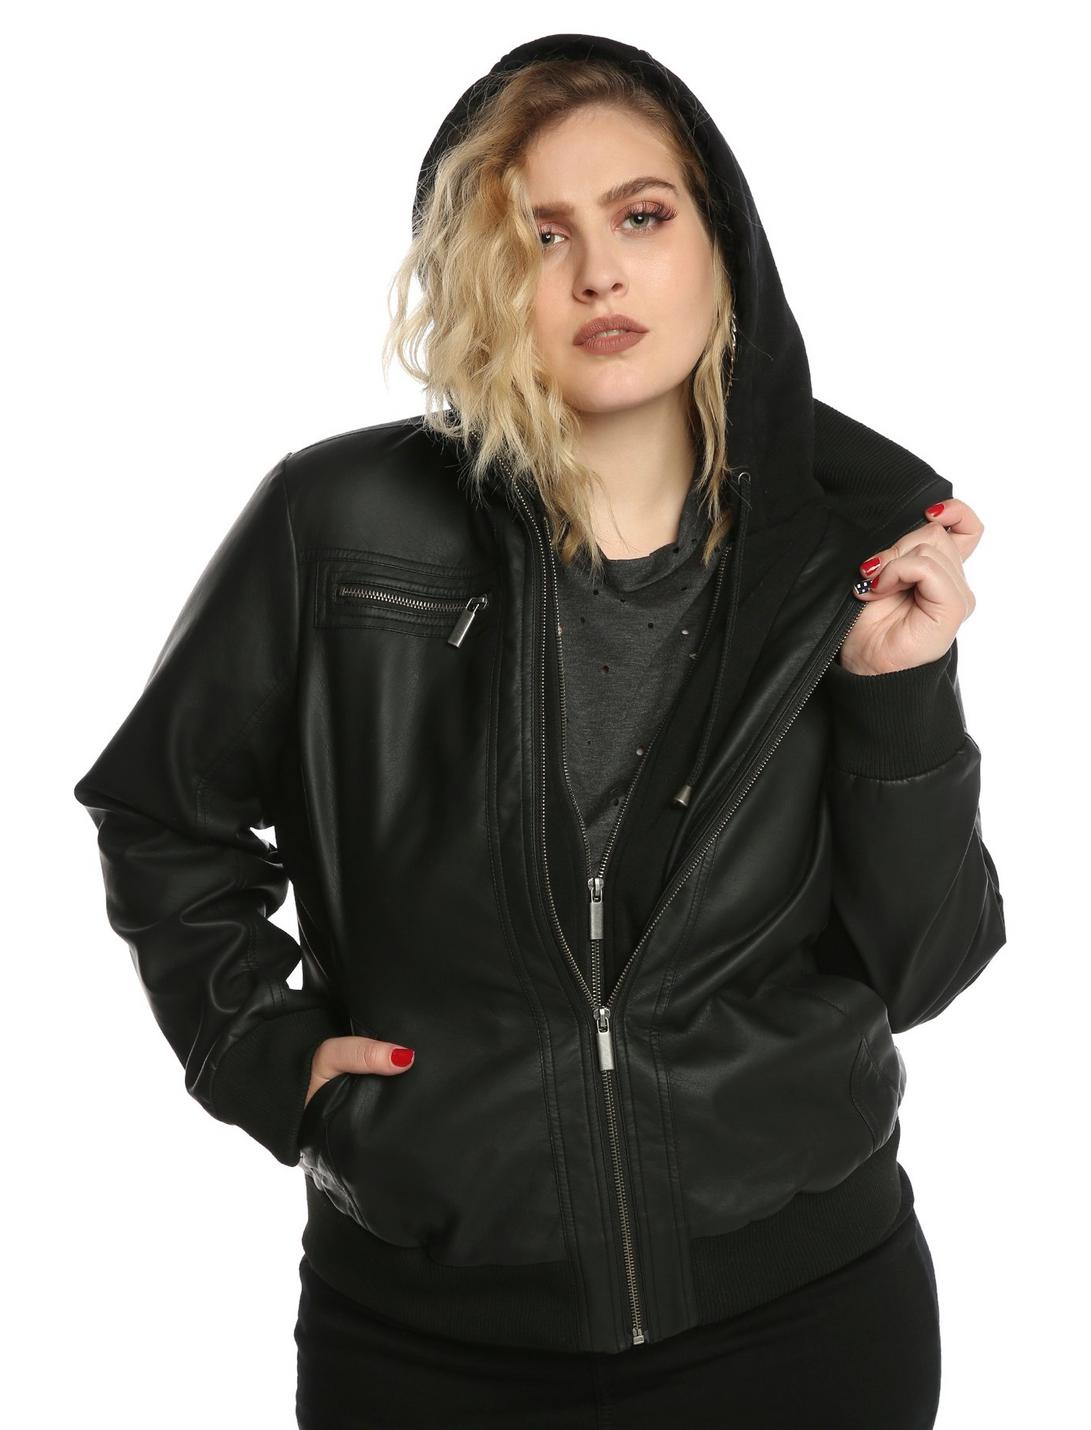 New Girls Black Faux Leather Jacket With Fur Various Sizes Available